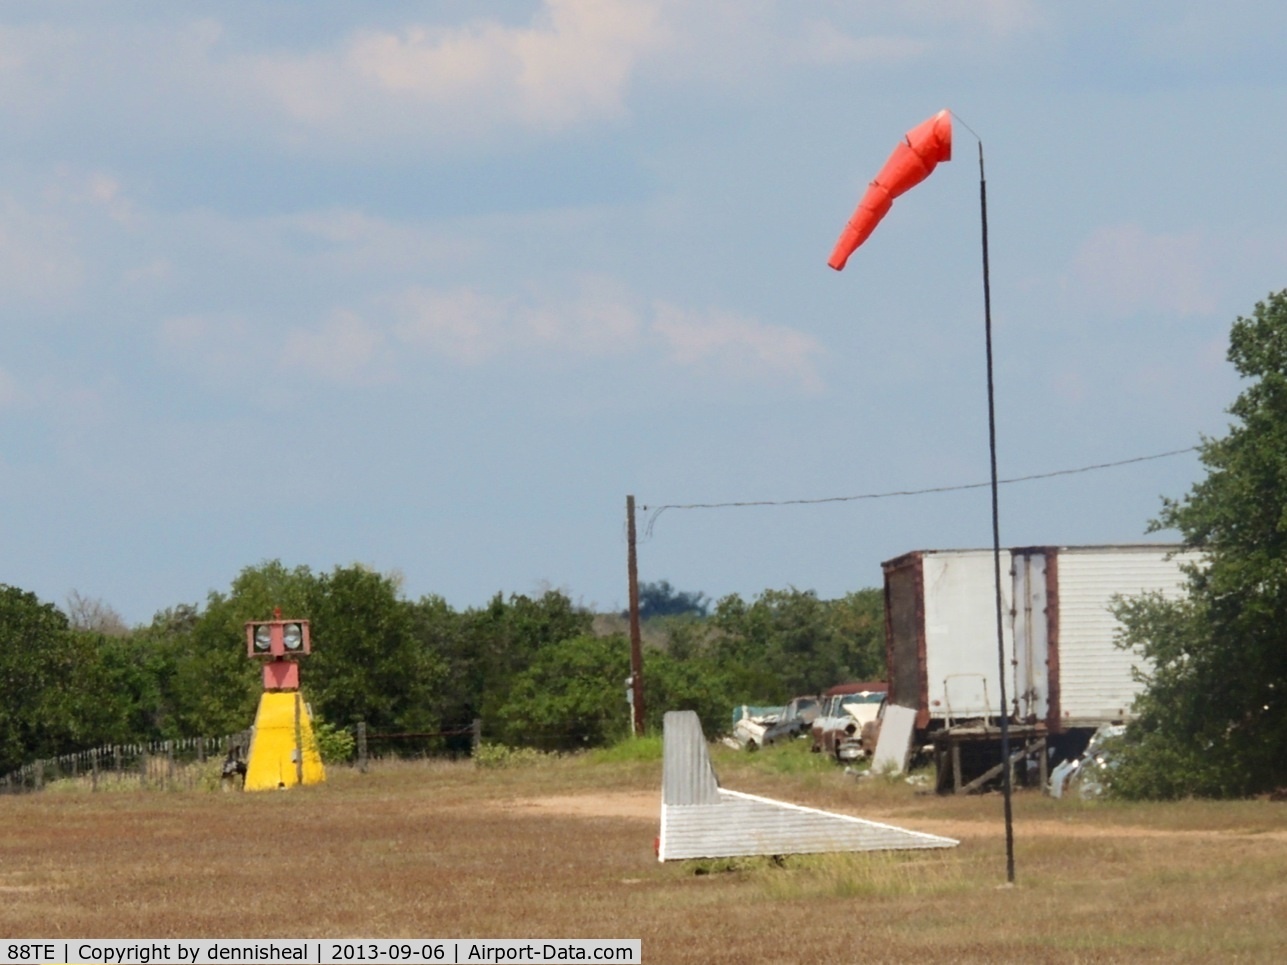 Thunderbird Southwest Airport (88TE) - Wind sock and wind direction indicator